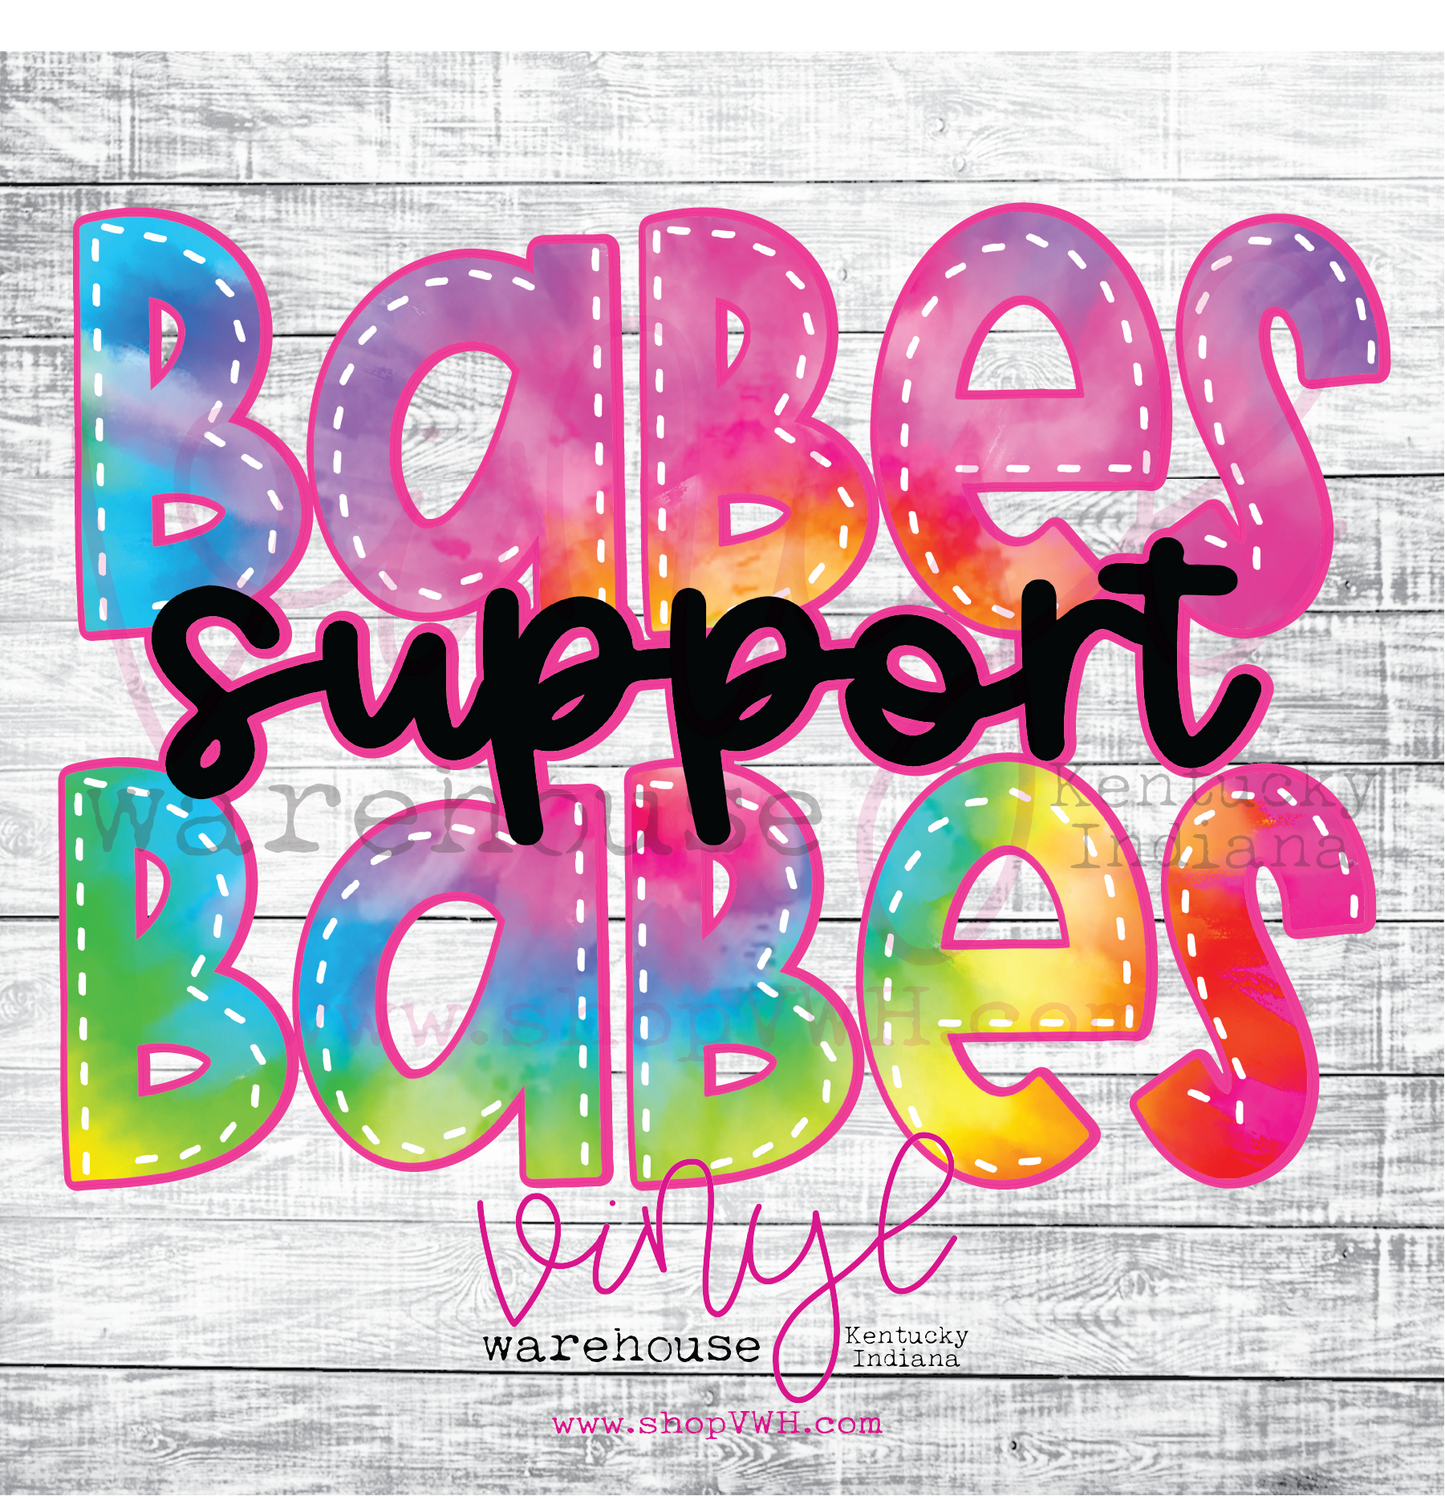 Babes Support Babes - Heat Transfer Print